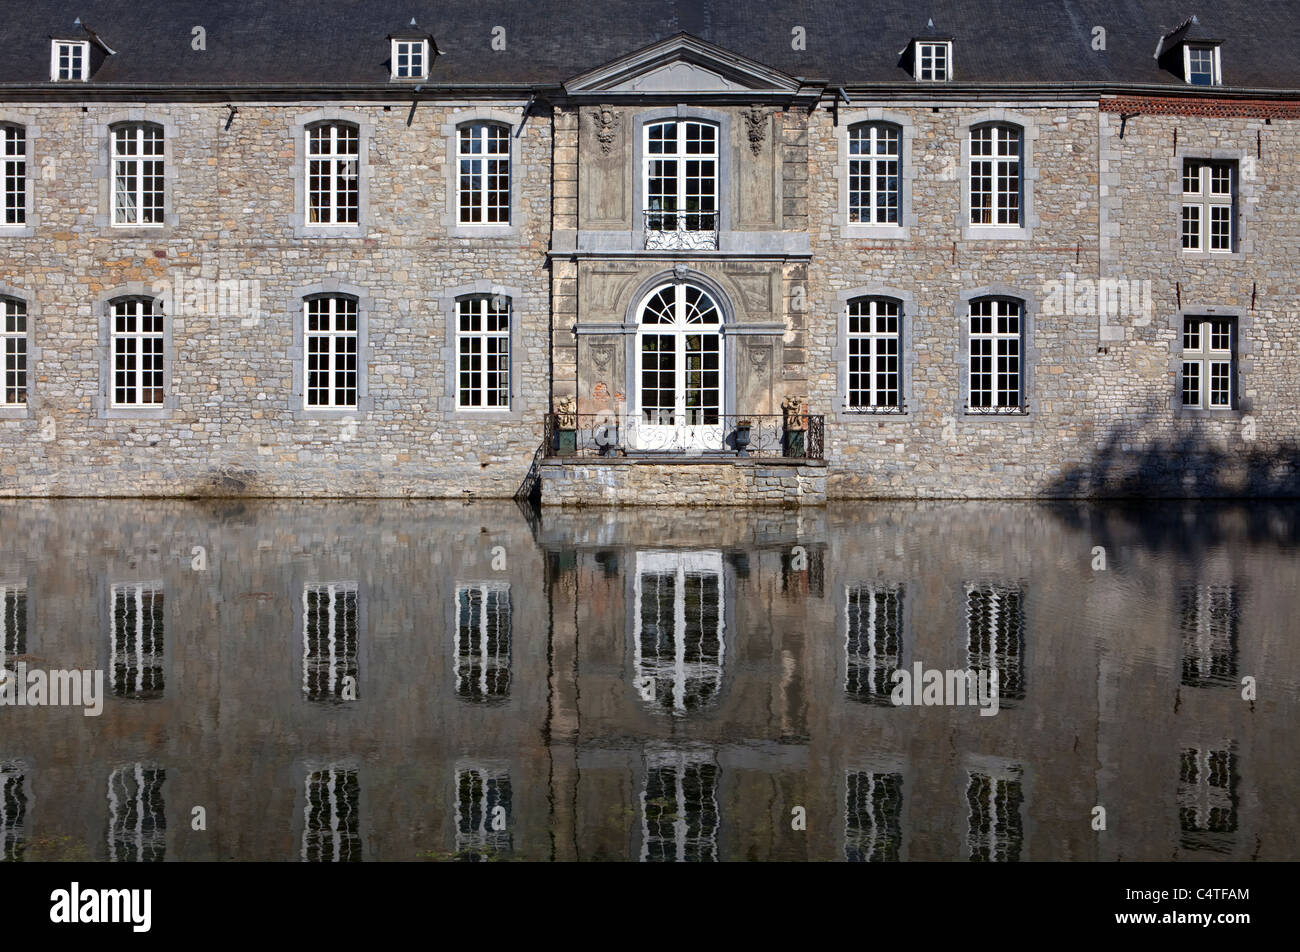 Château and Jardins d'Annevoie castle and water gardens of Annevoie, Wallonia, Belgium, Europe Stock Photo